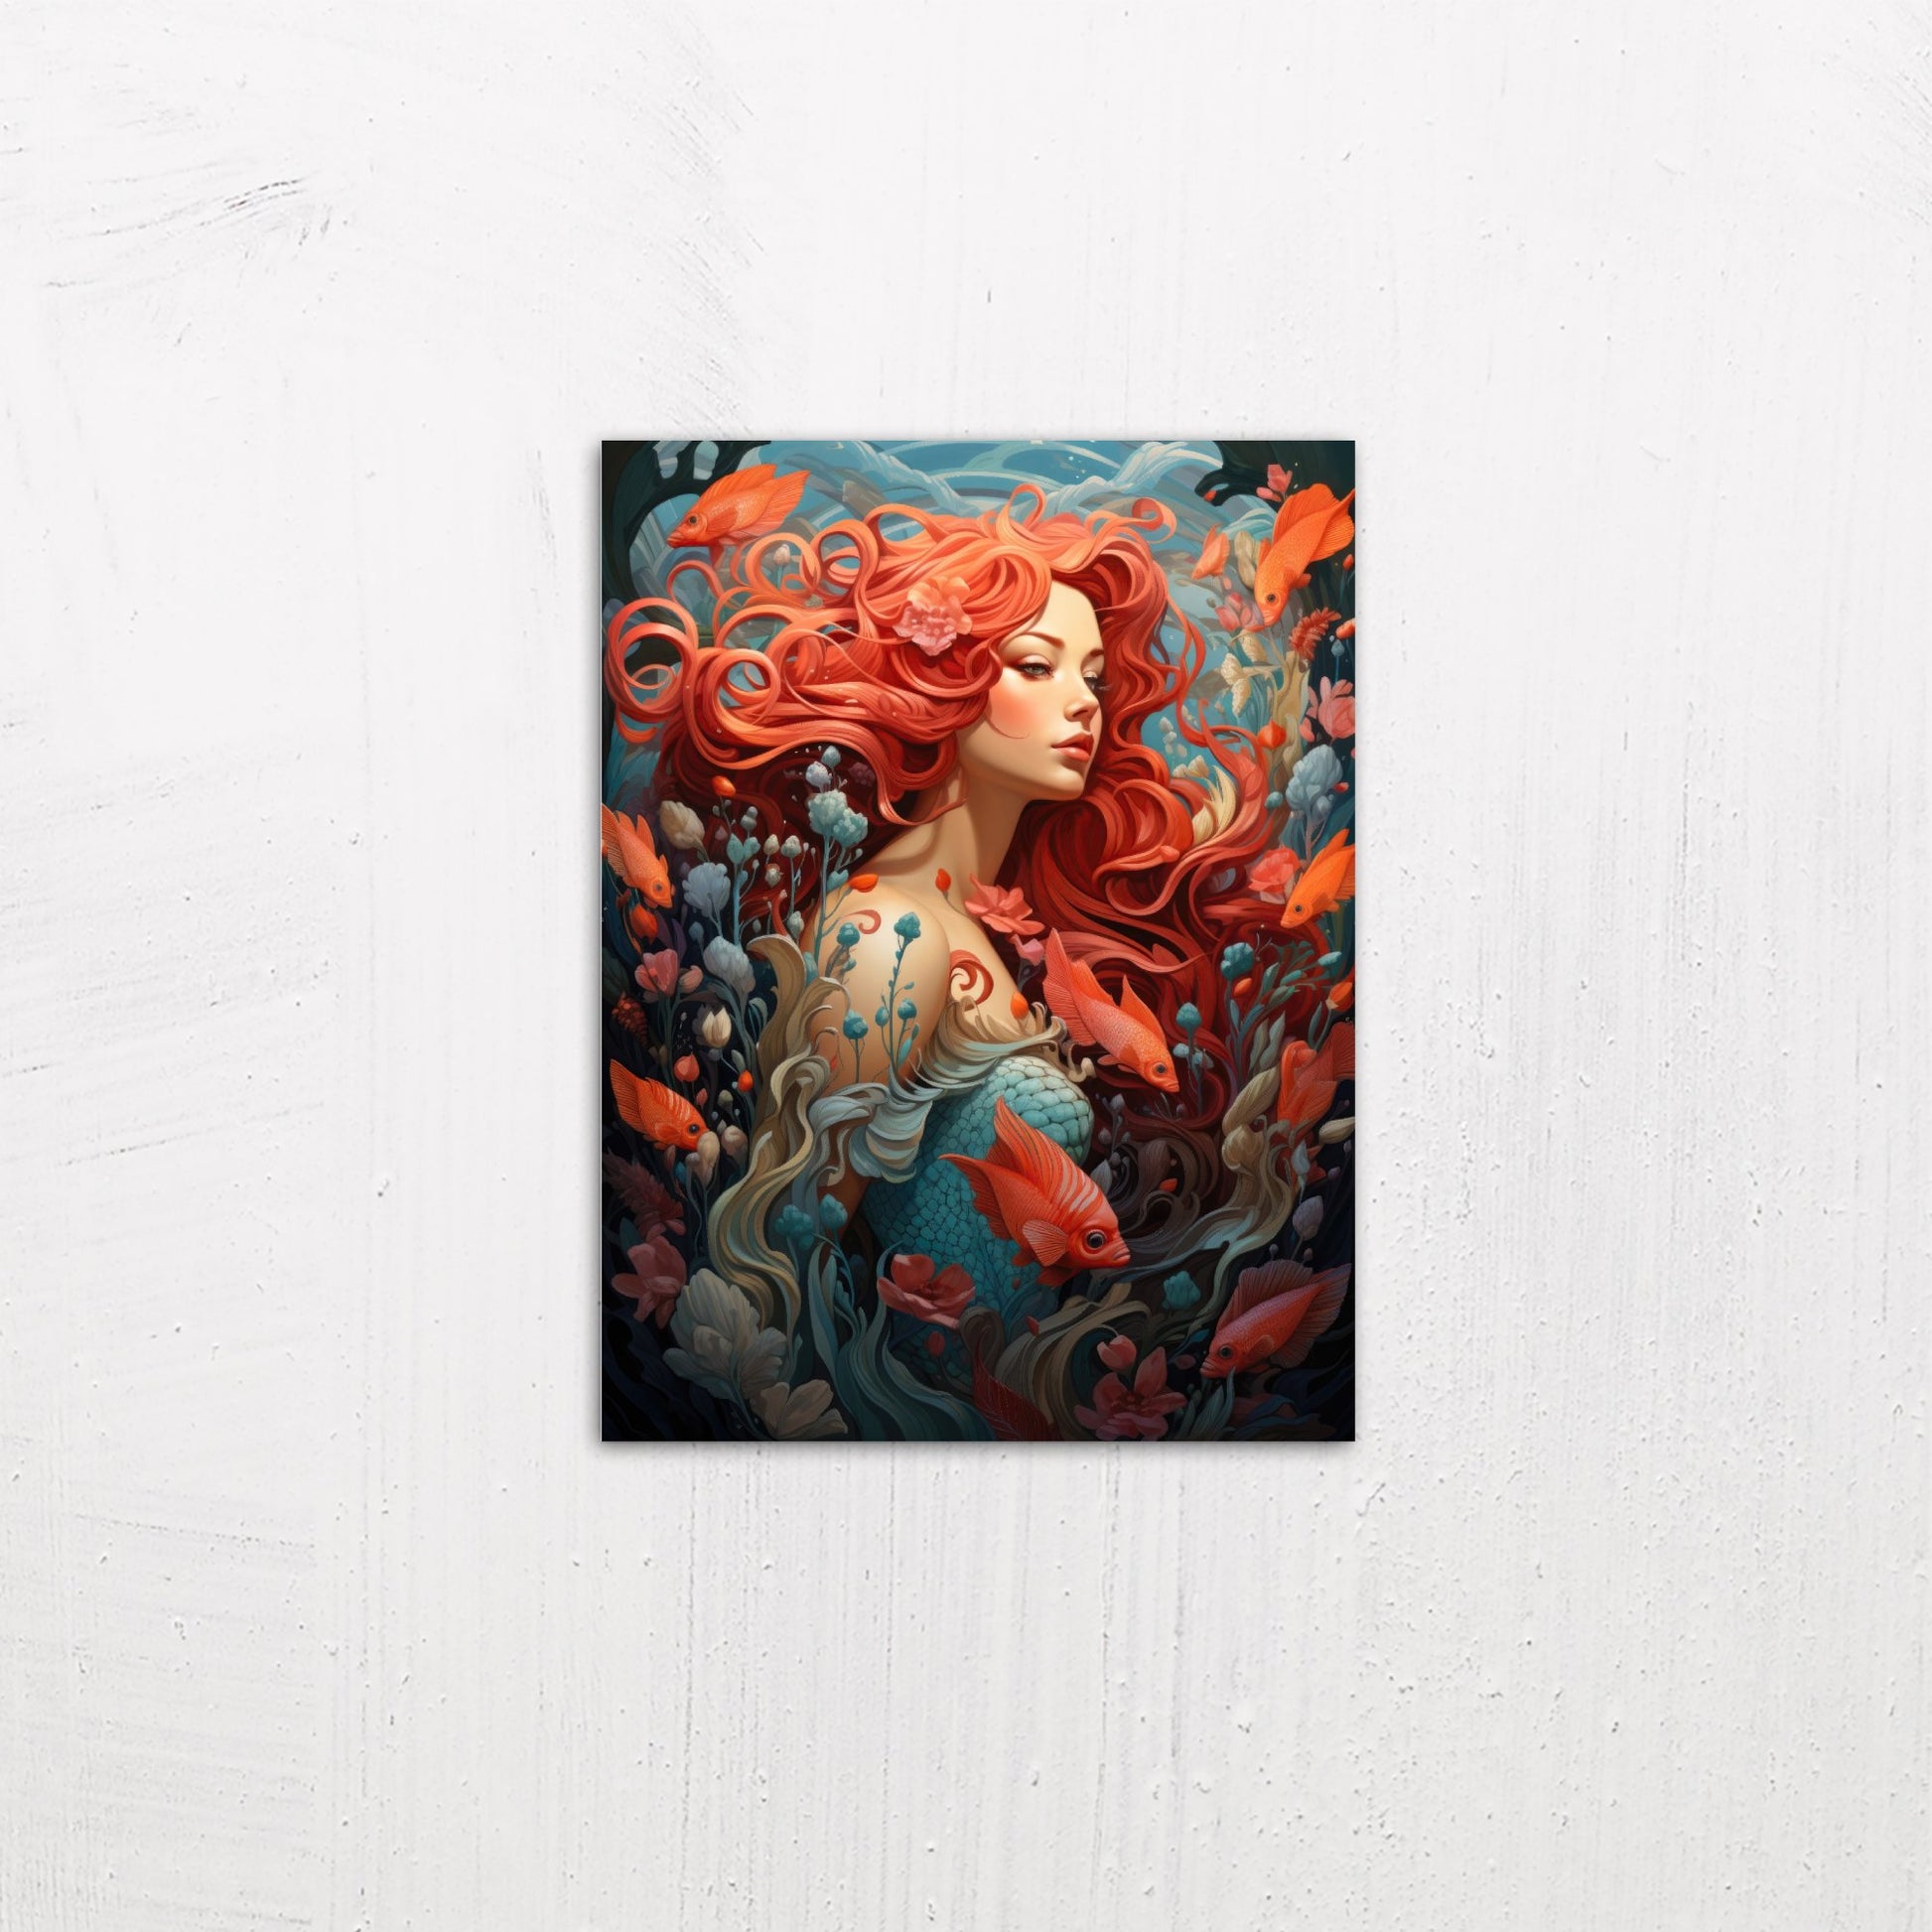 A small size metal art poster display plate with printed design of a Mermaid Fantasy Painting